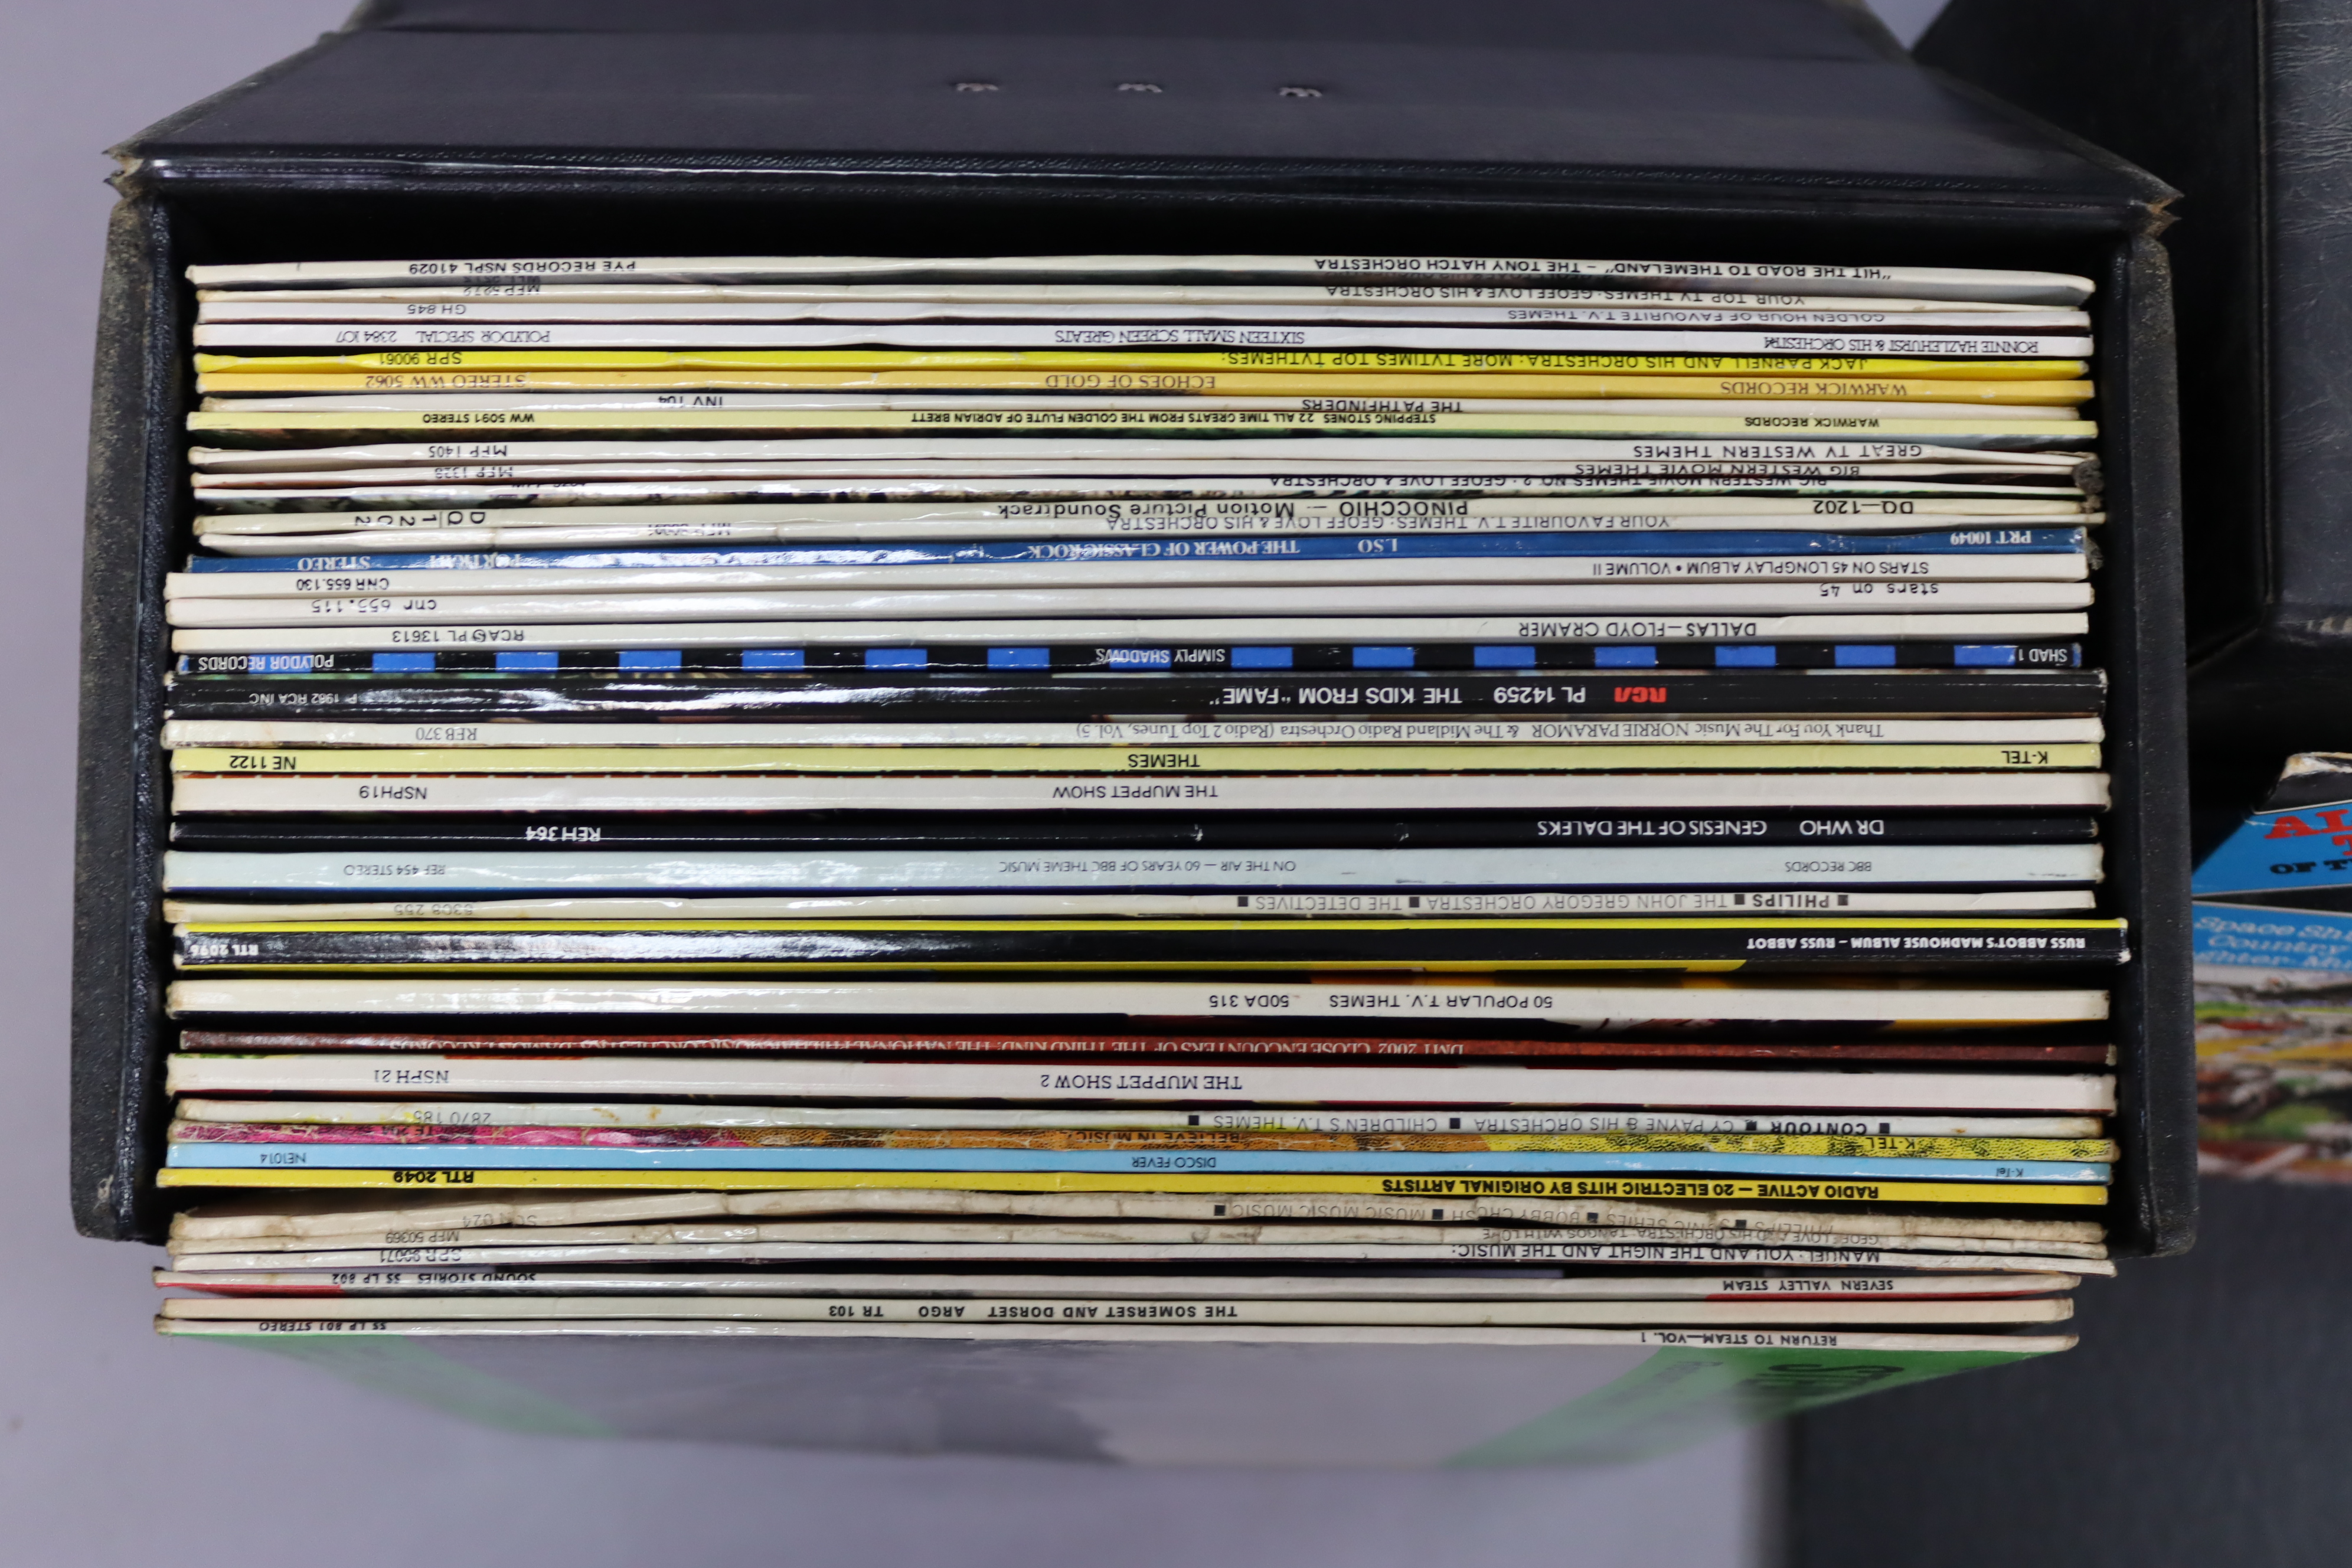 Approximately one hundred various records – pop, classical, etc. - Image 3 of 6